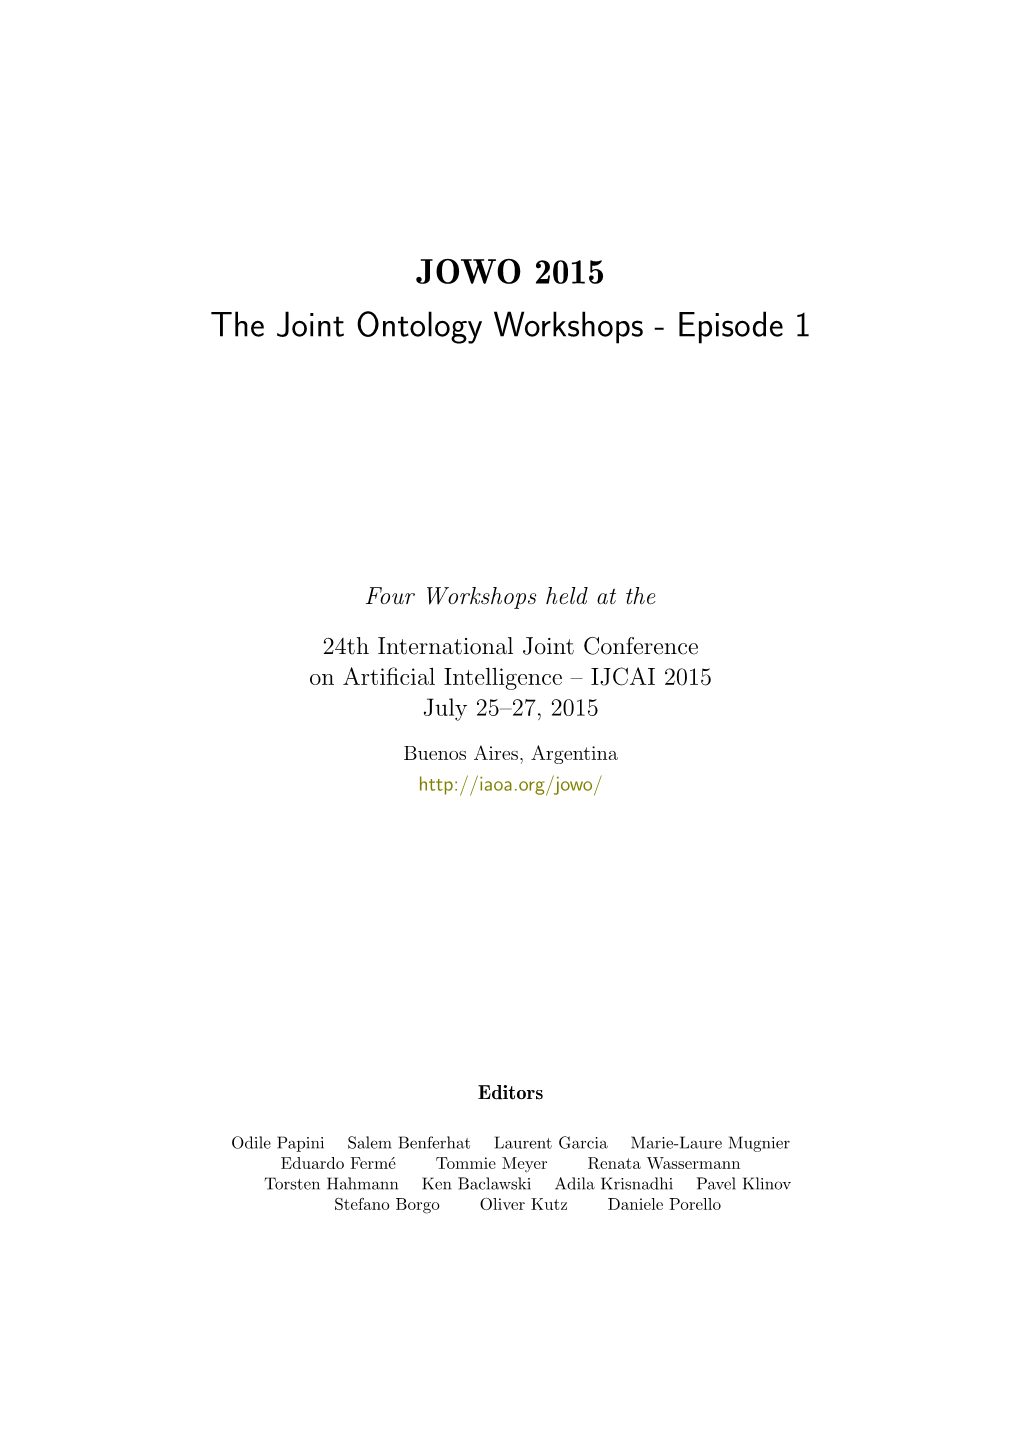 JOWO 2015 the Joint Ontology Workshops - Episode 1